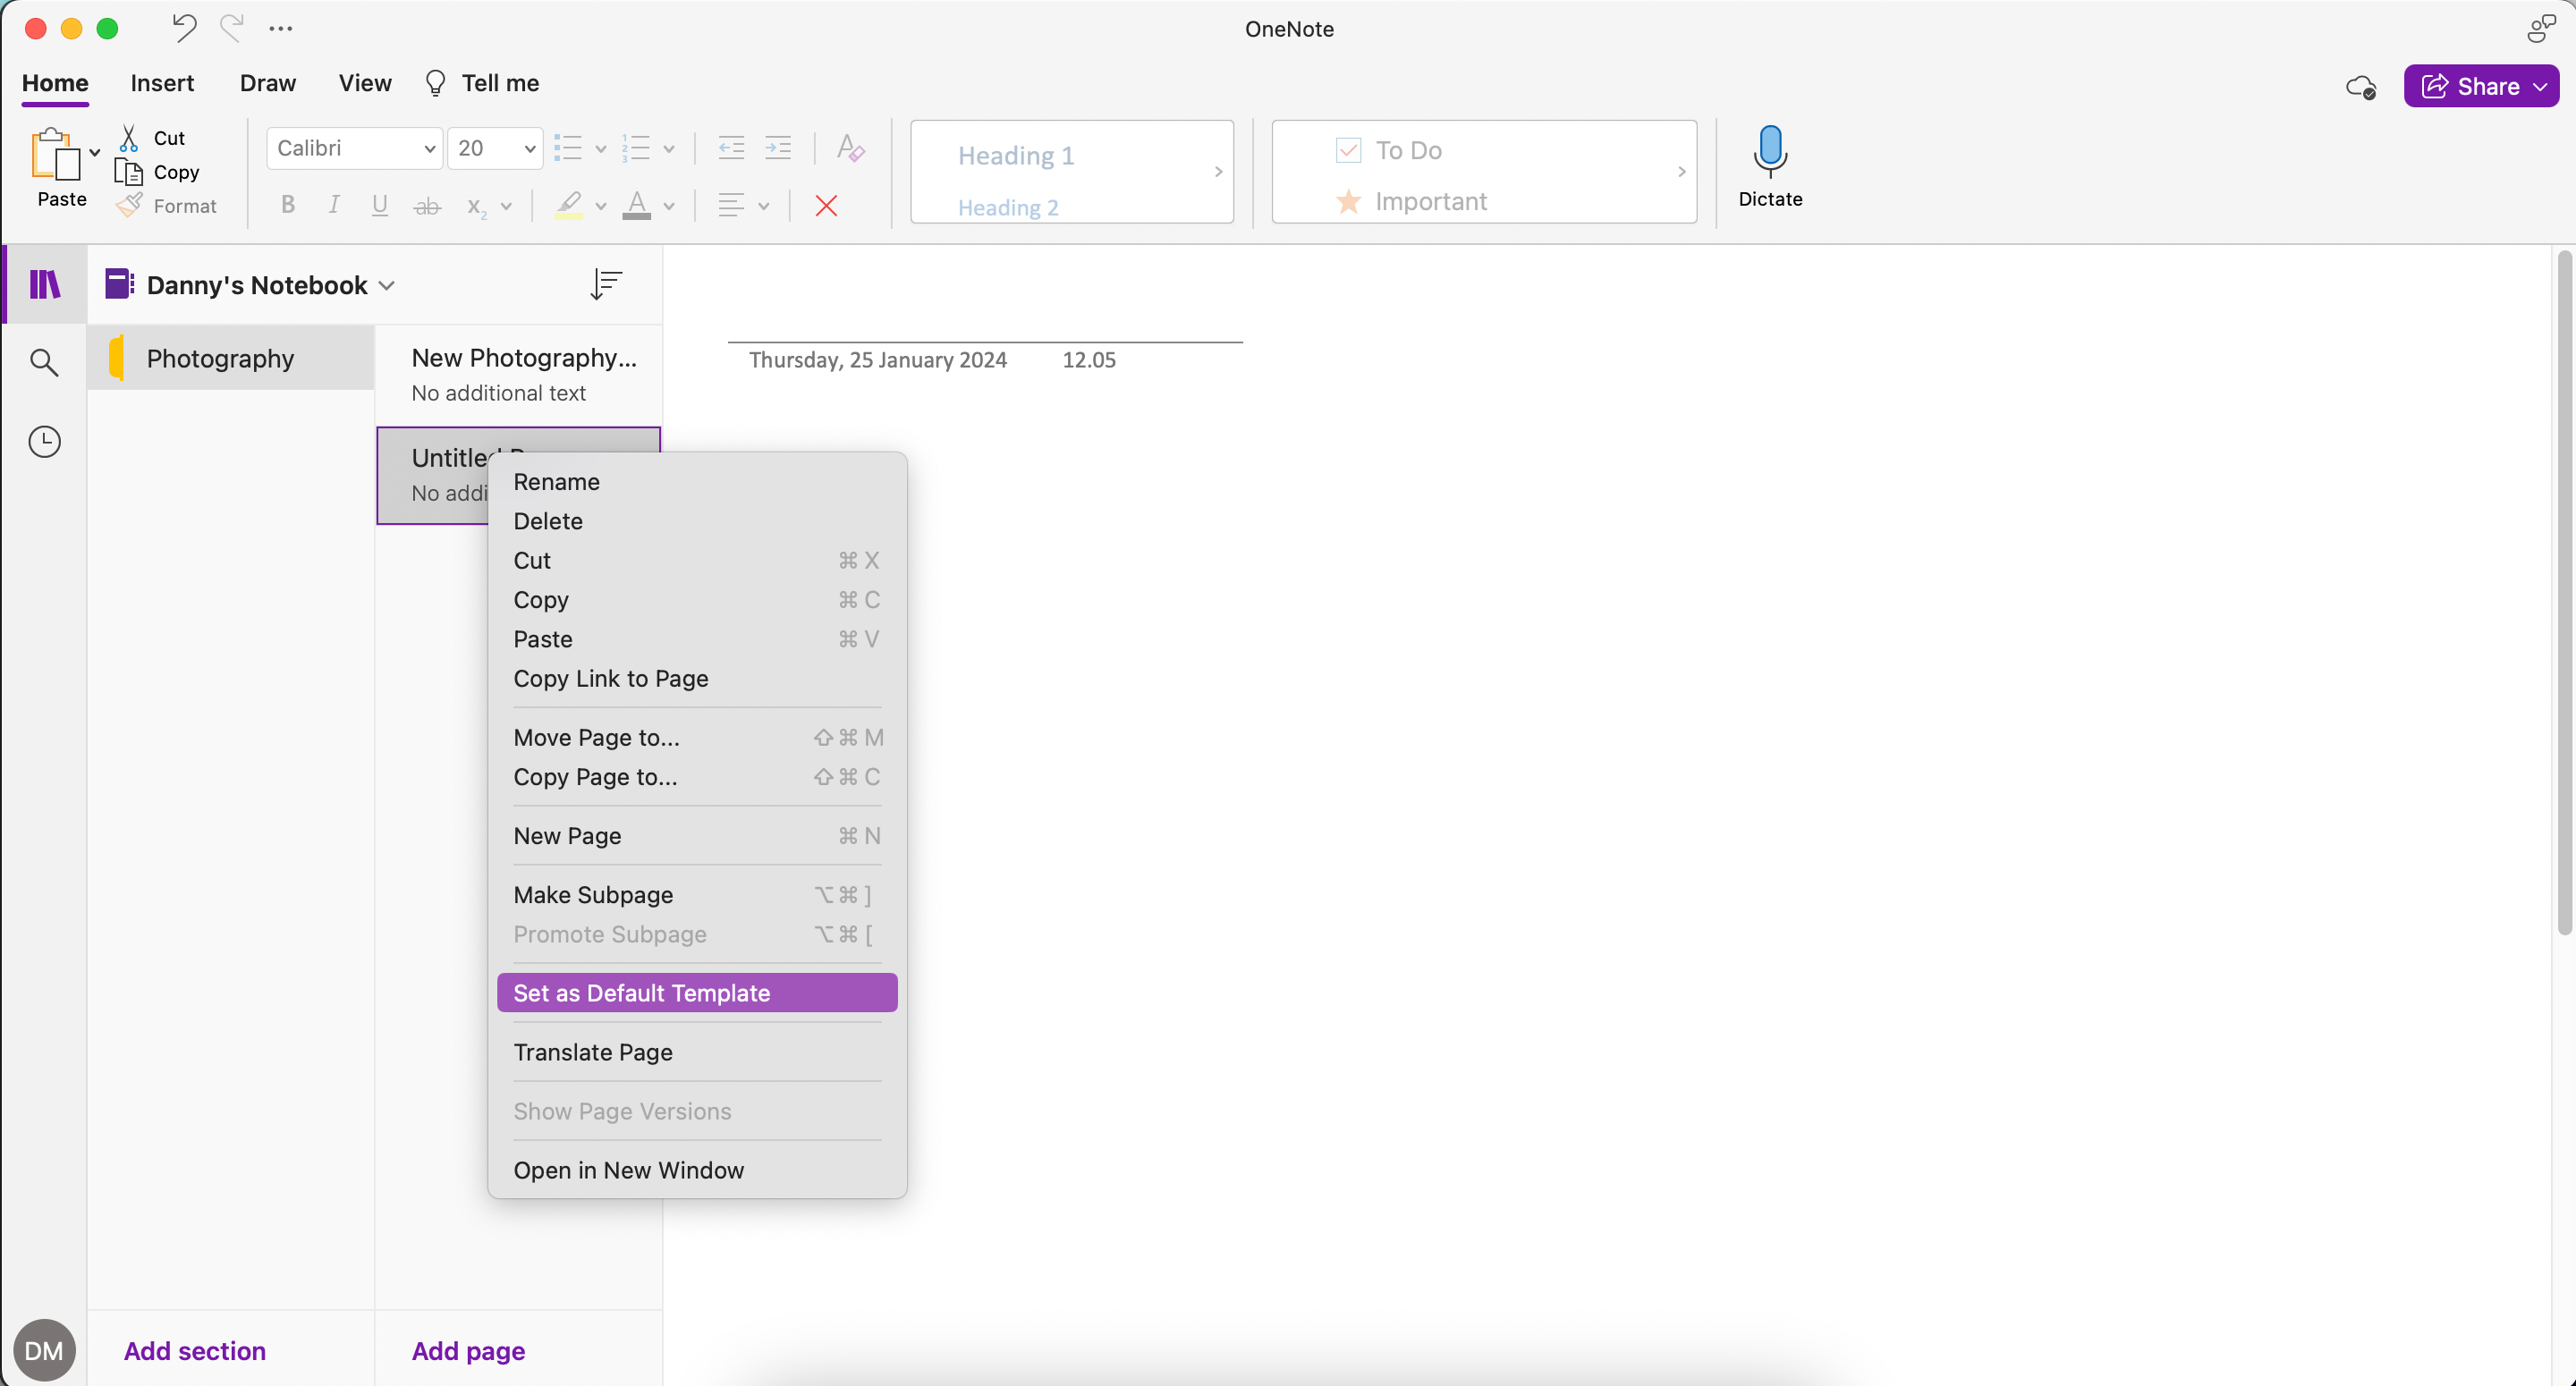 Set Your Default Template in the OneNote App for Easy Access